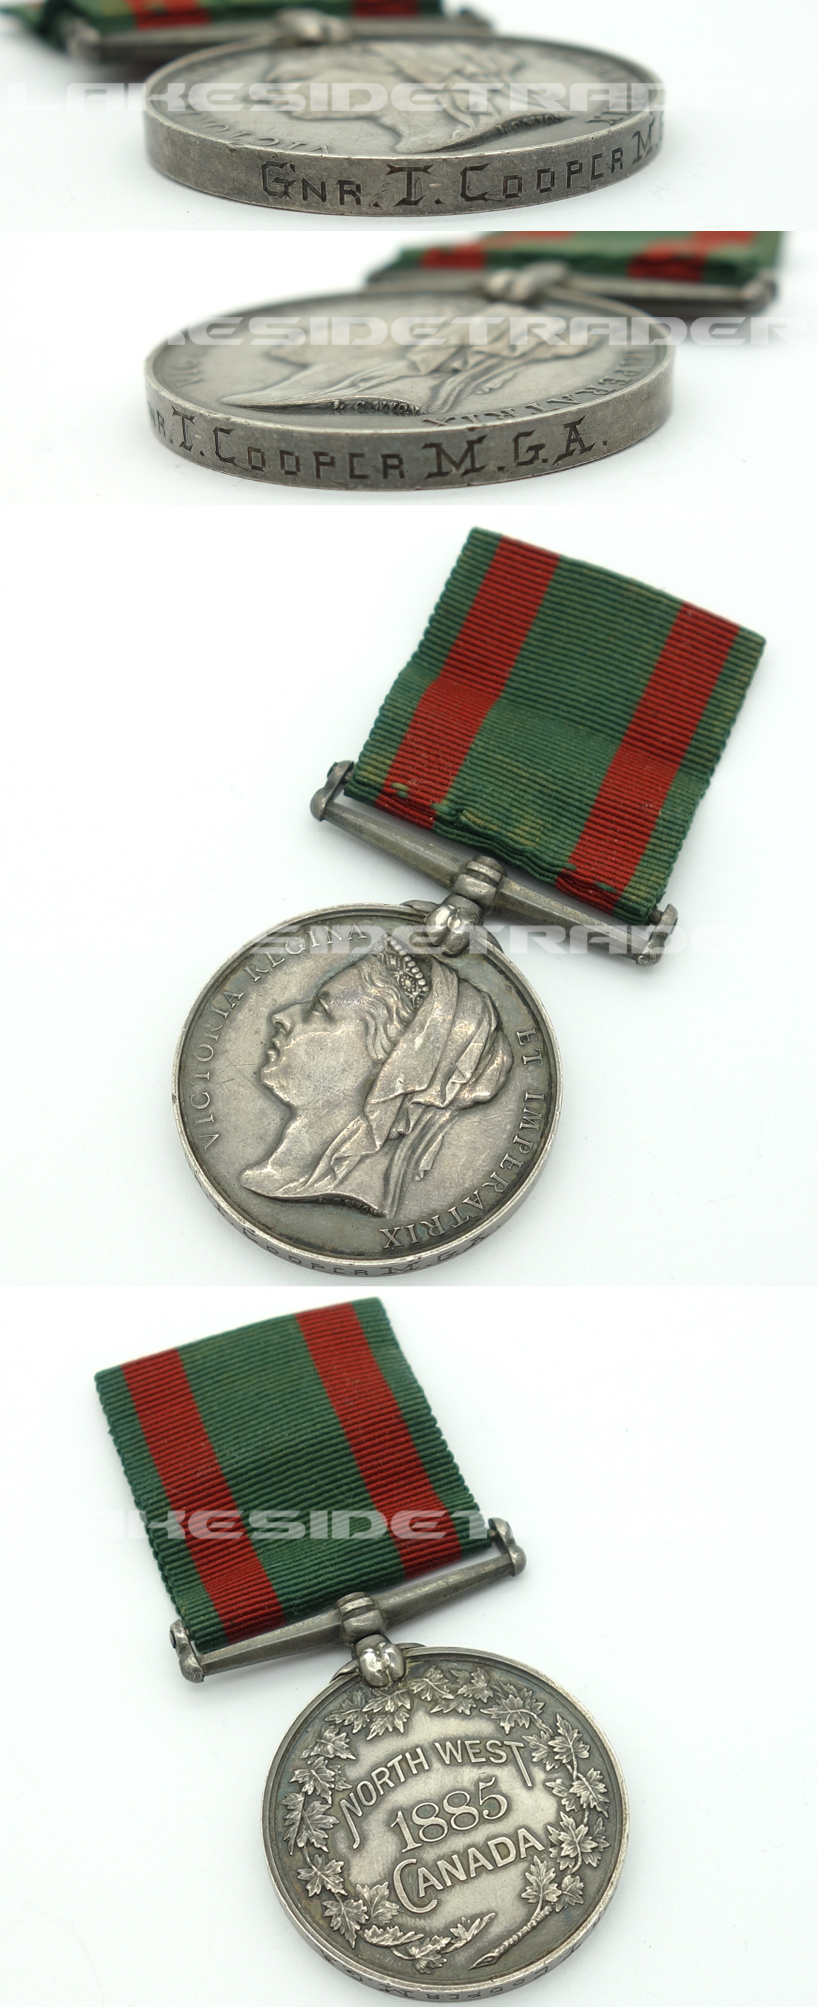 North West Canada Medal 1885